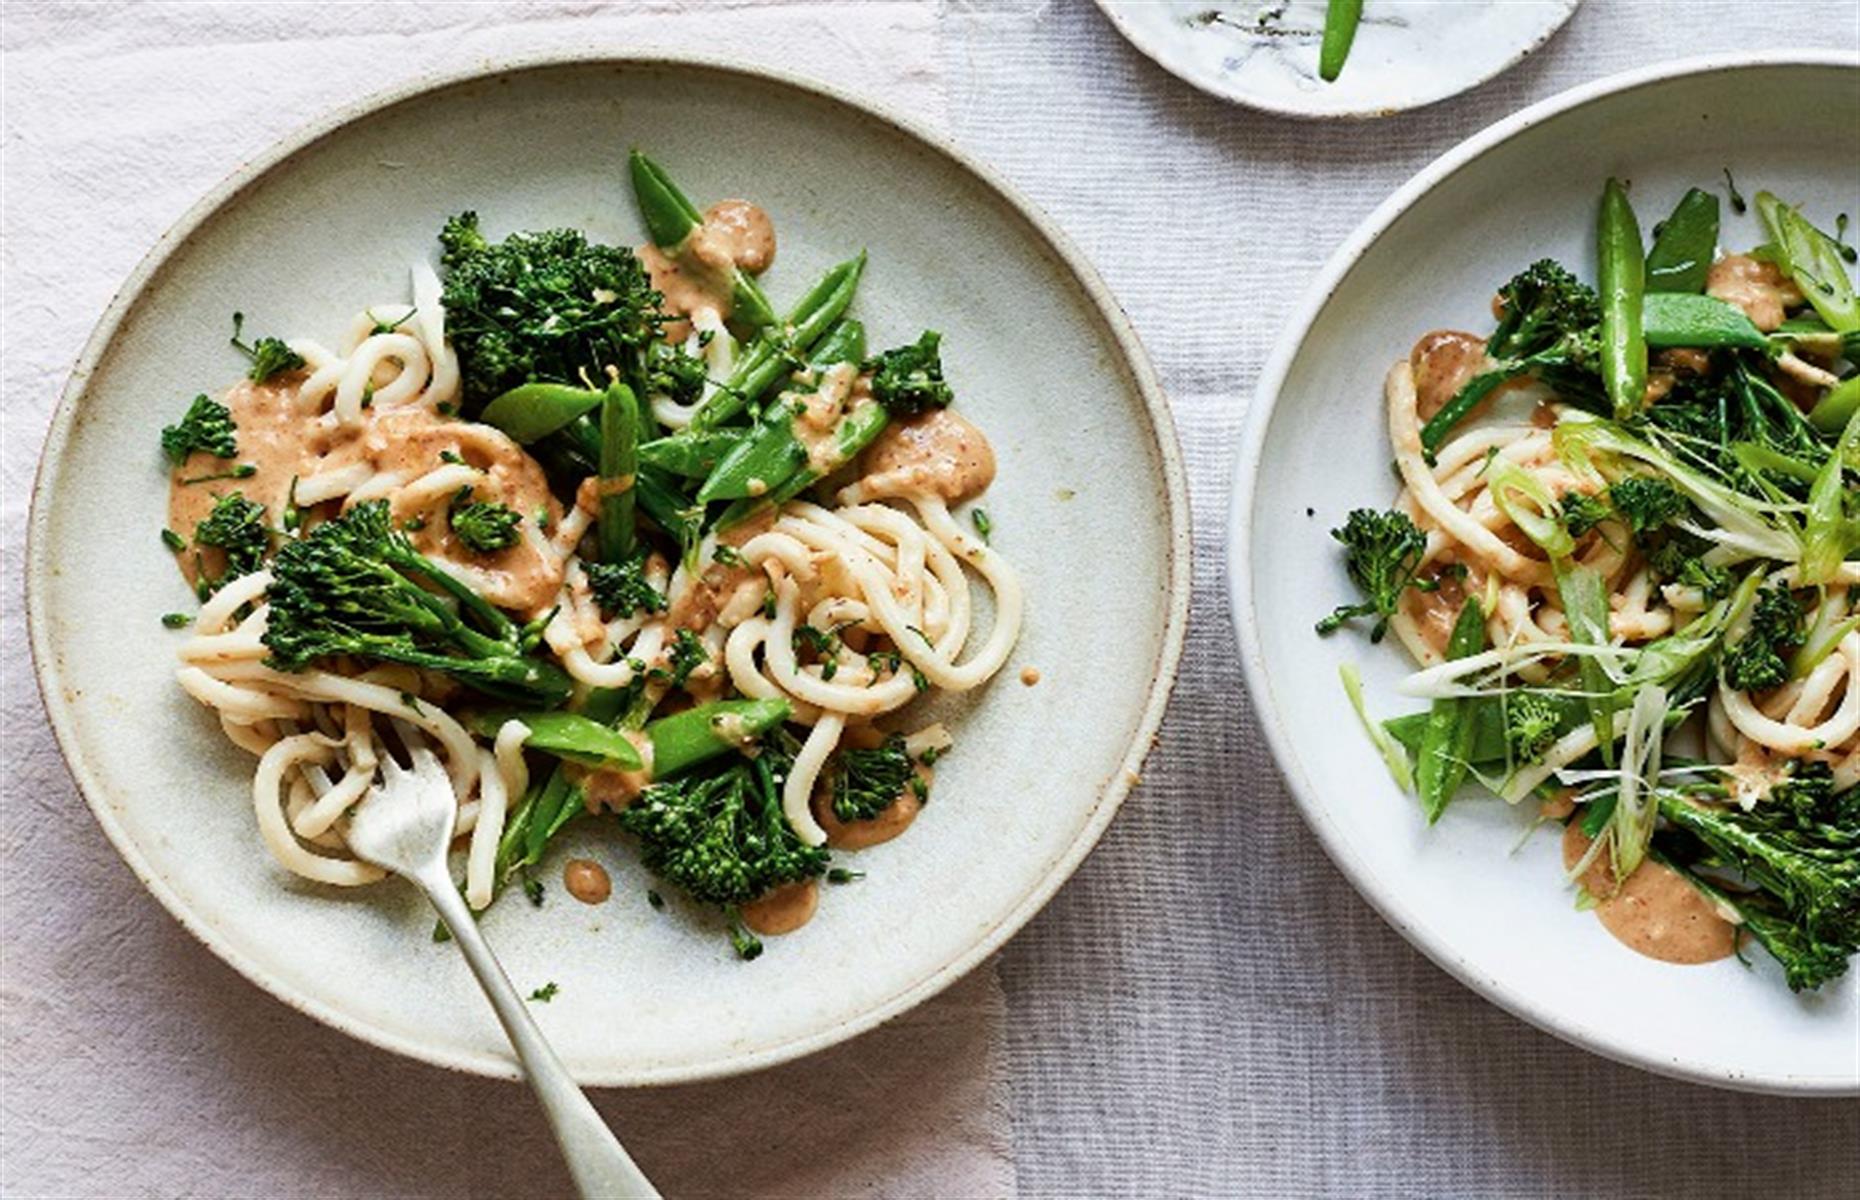 Super-speedy dinner recipes to get you through the week